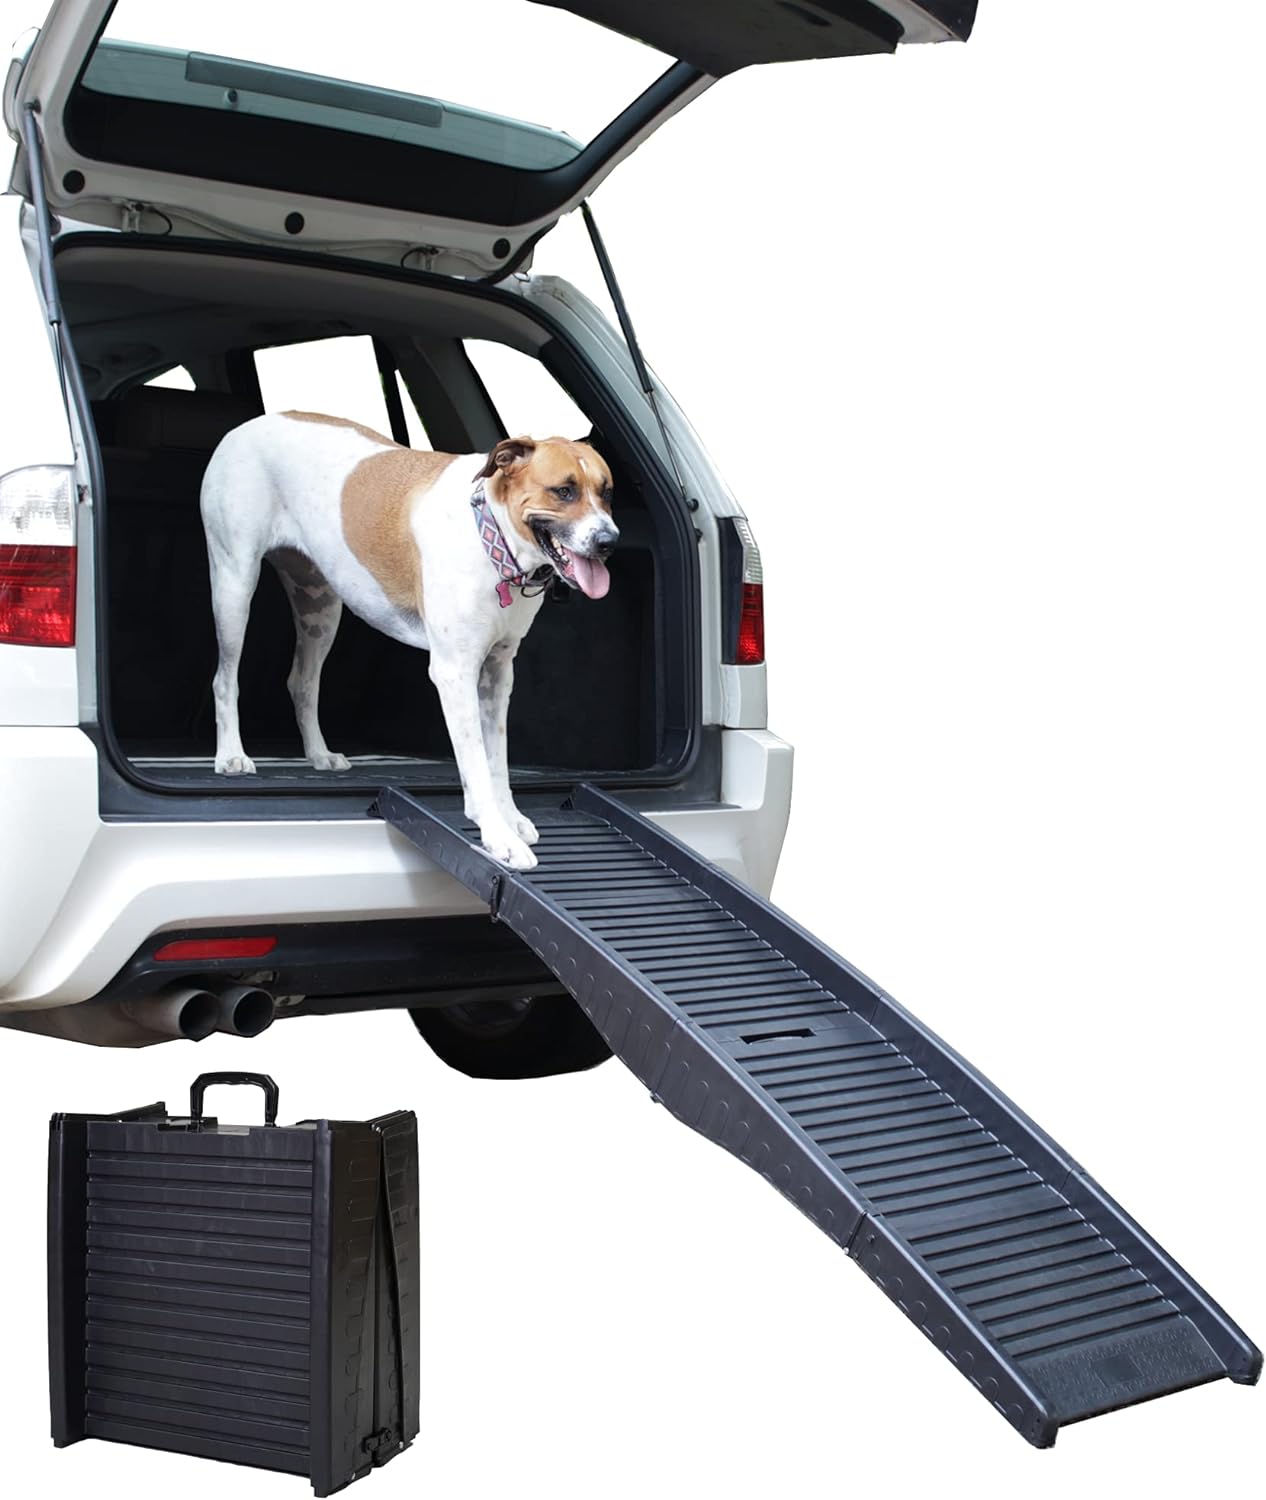 Silly Millie Compact Folding Pet Ramp for Your Dog & Cat. Great for Cars, Trucks and SUVs